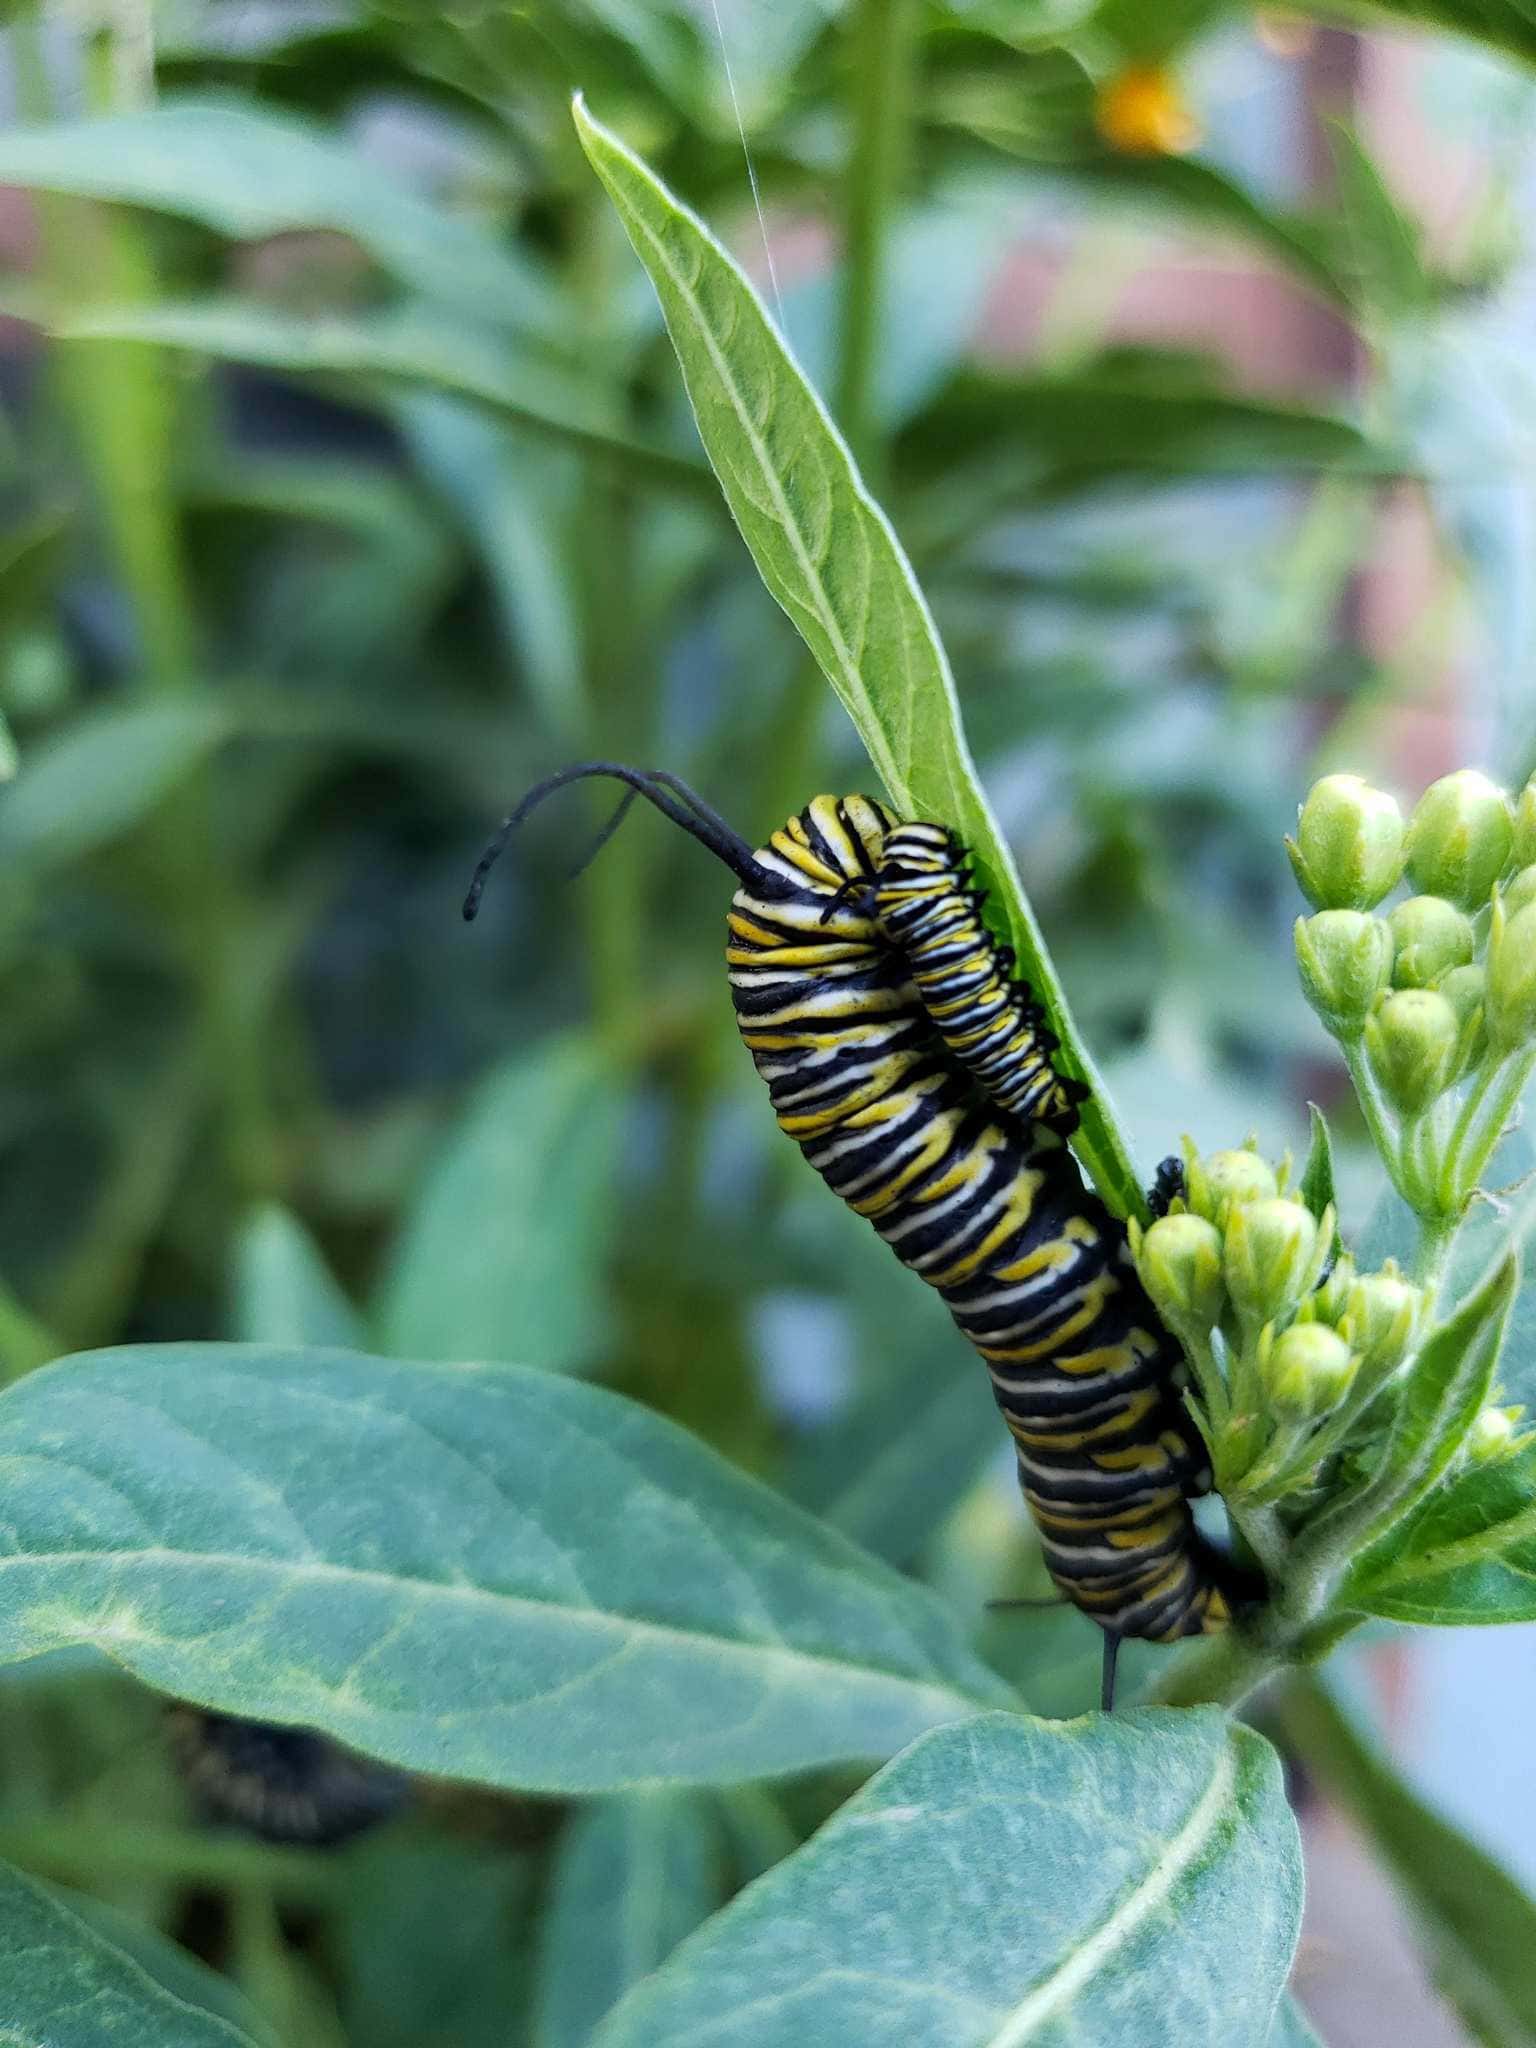 A closeup image of a milkweed plant that has two Monarch caterpillars on it sharing one leaf. One of the caterpillars is much larger than the other, about ten times its size, the large caterpillar will soon pupate into a chrysalis before it turns into a butterfly. Providing host plants for caterpillars is one way to provide wildlife habitat.
 